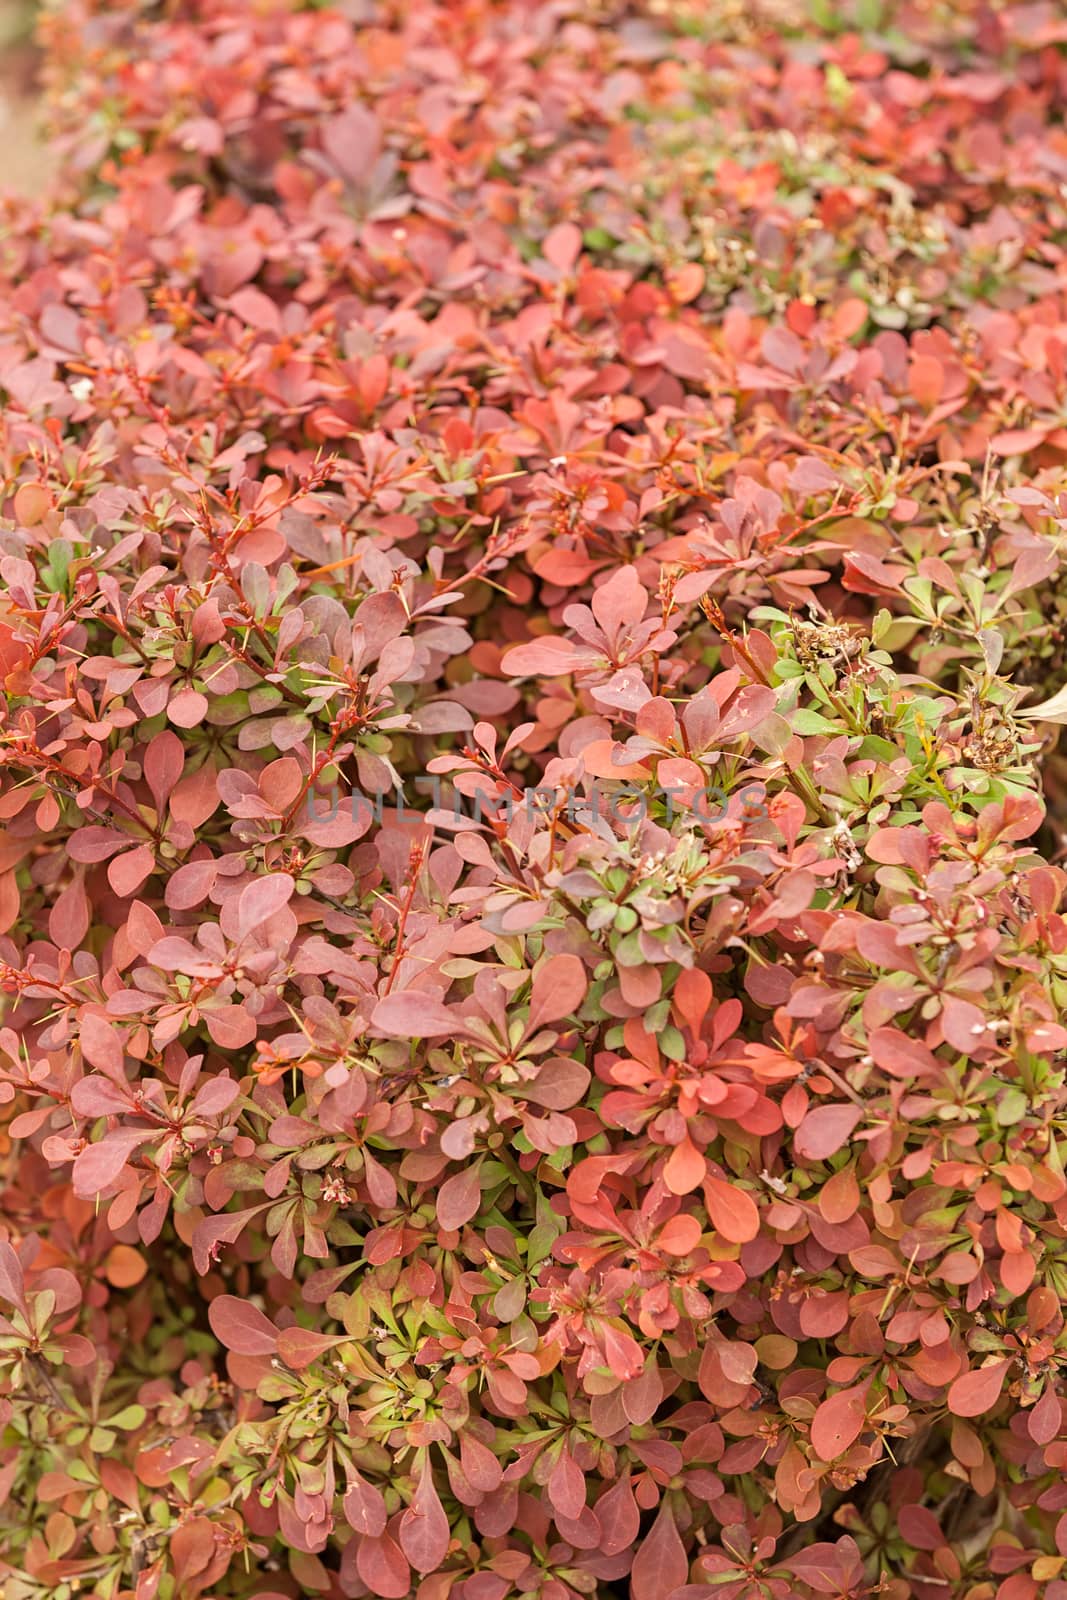 shrub with red leaves, note shallow depth of field